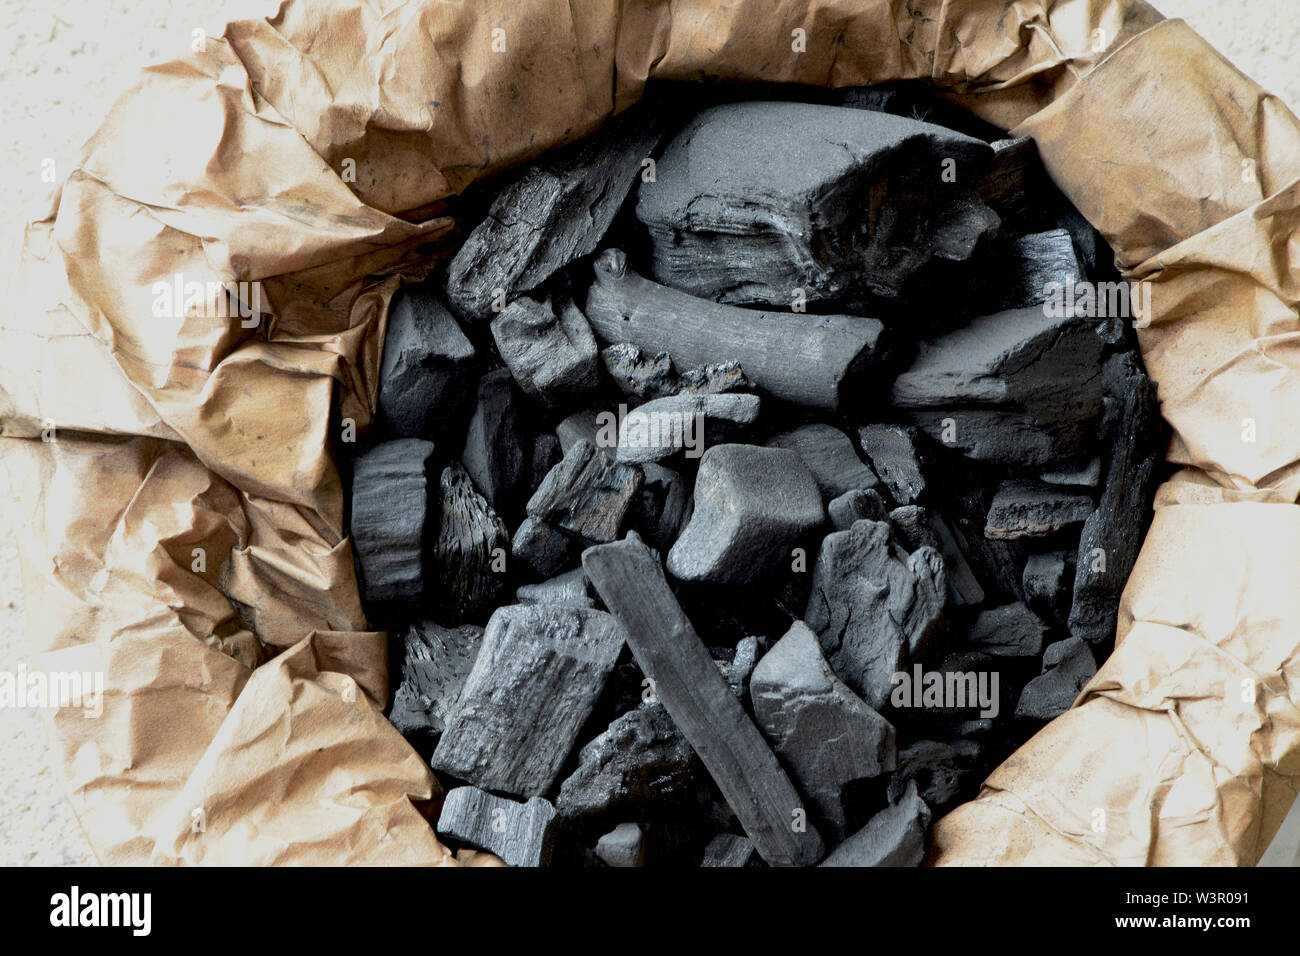 Charcoal for barbecuing in opened paper bag. Germany Stock Photo